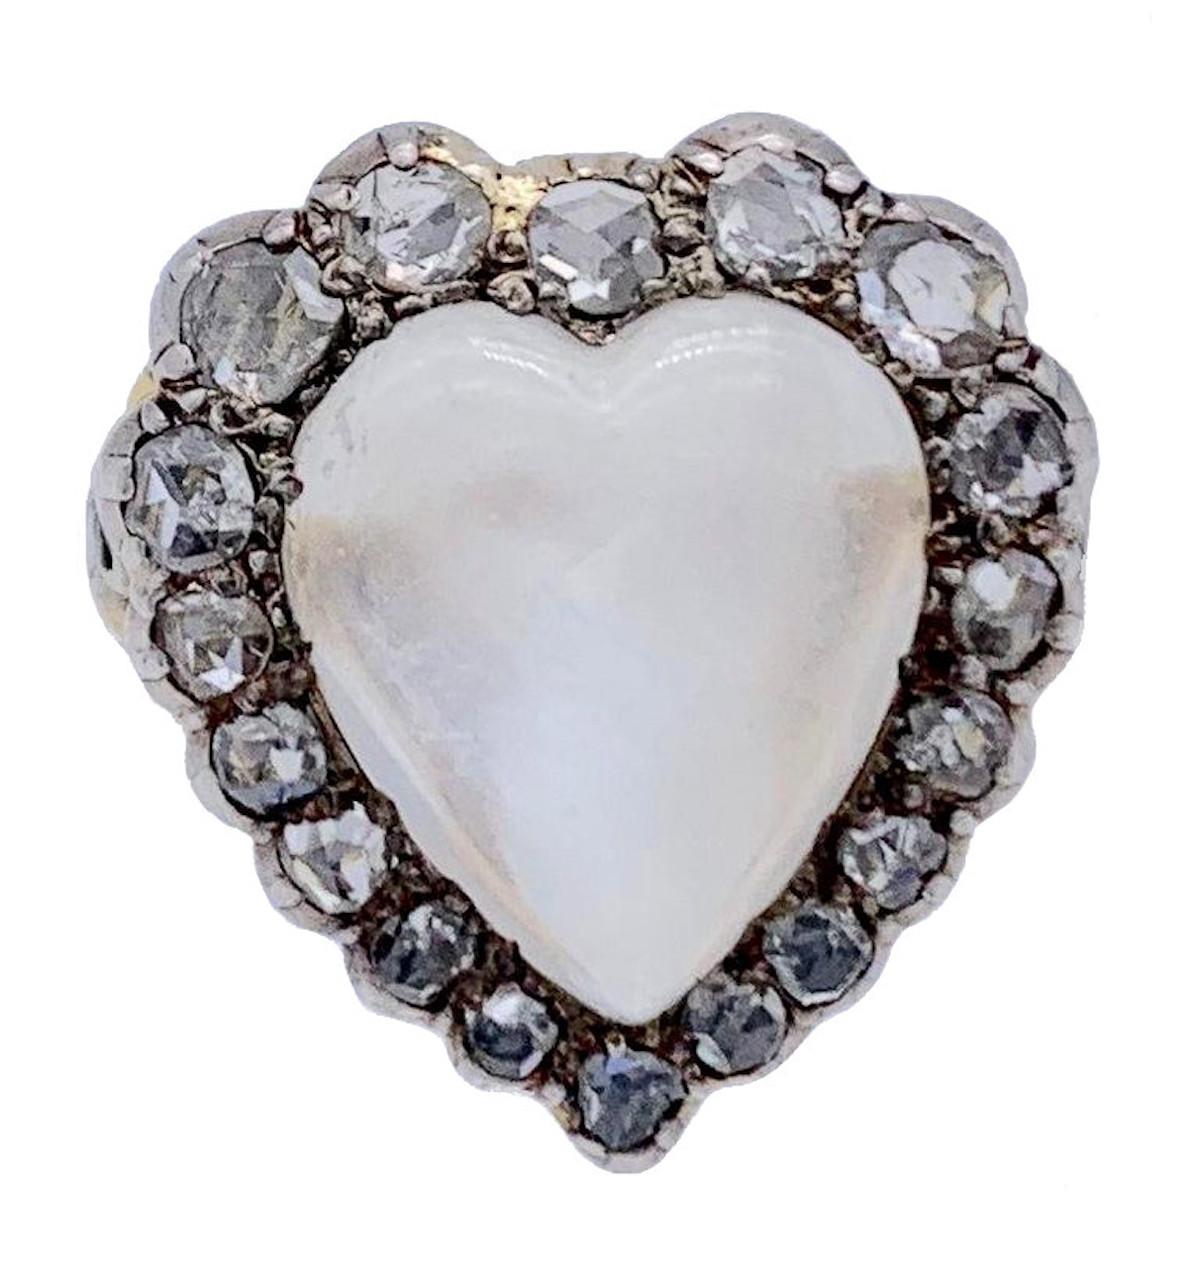 A moonstone cabochon in the shape of a heart is surrounded by diamonds set in silver and mounted on a beautifully engraved golden shank. The inside of the ring rail has British hallmarks for London 18kt, the head of Victoria looking to the left, the